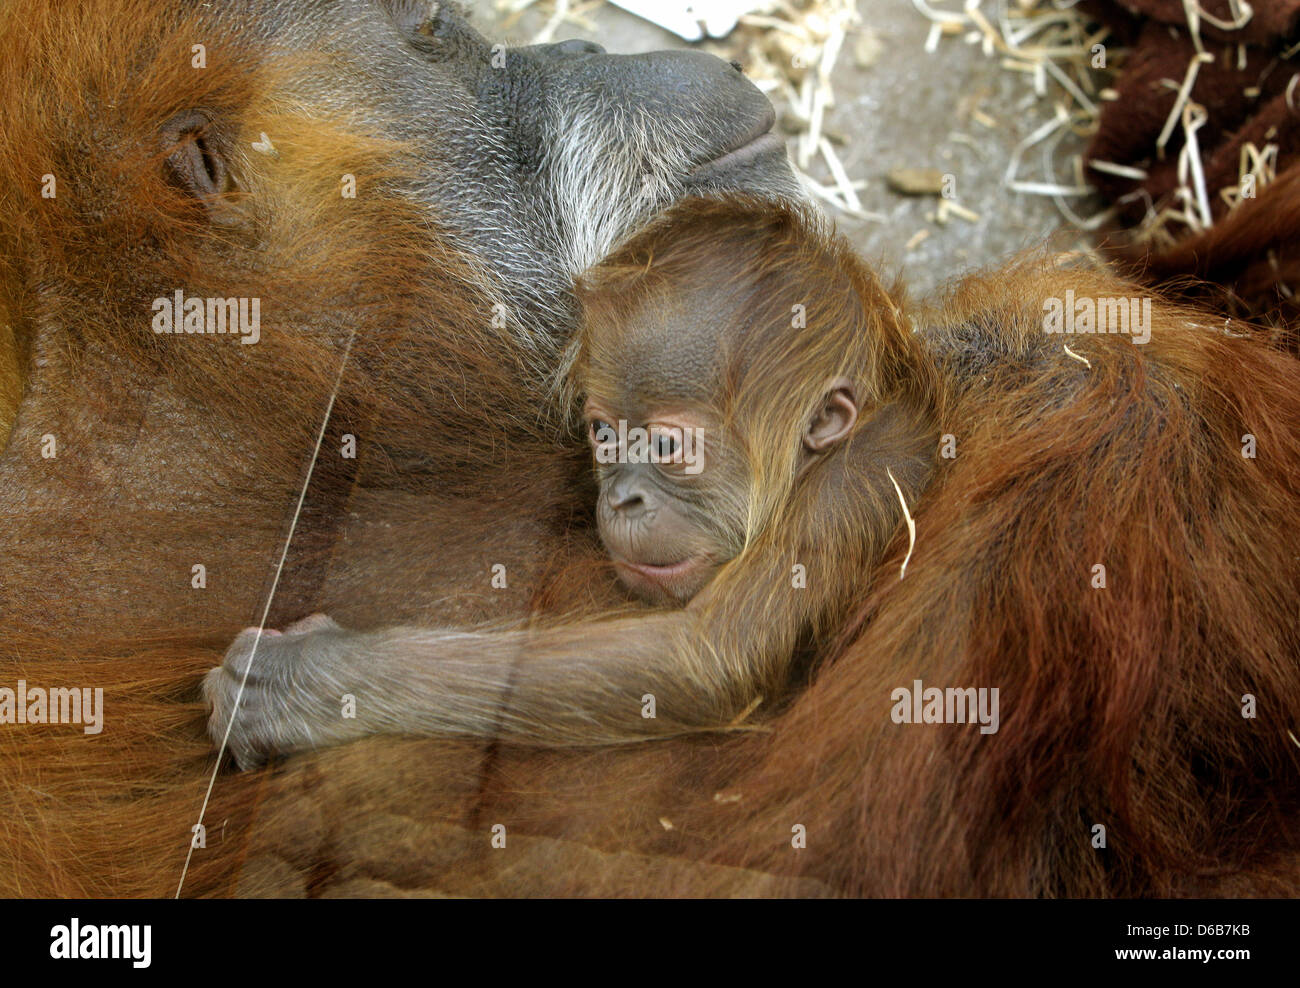 The six-day old Orangutan baby cuddles with it mother at Zoom Erlebniswelt in Gelsenkirchen, Germany, 22 August 2012 (Photographed through a pane of glass). Its birth was a surprise because mother Sexta is 40 years old. Photo: ROLAND WEIHRAUCH Stock Photo